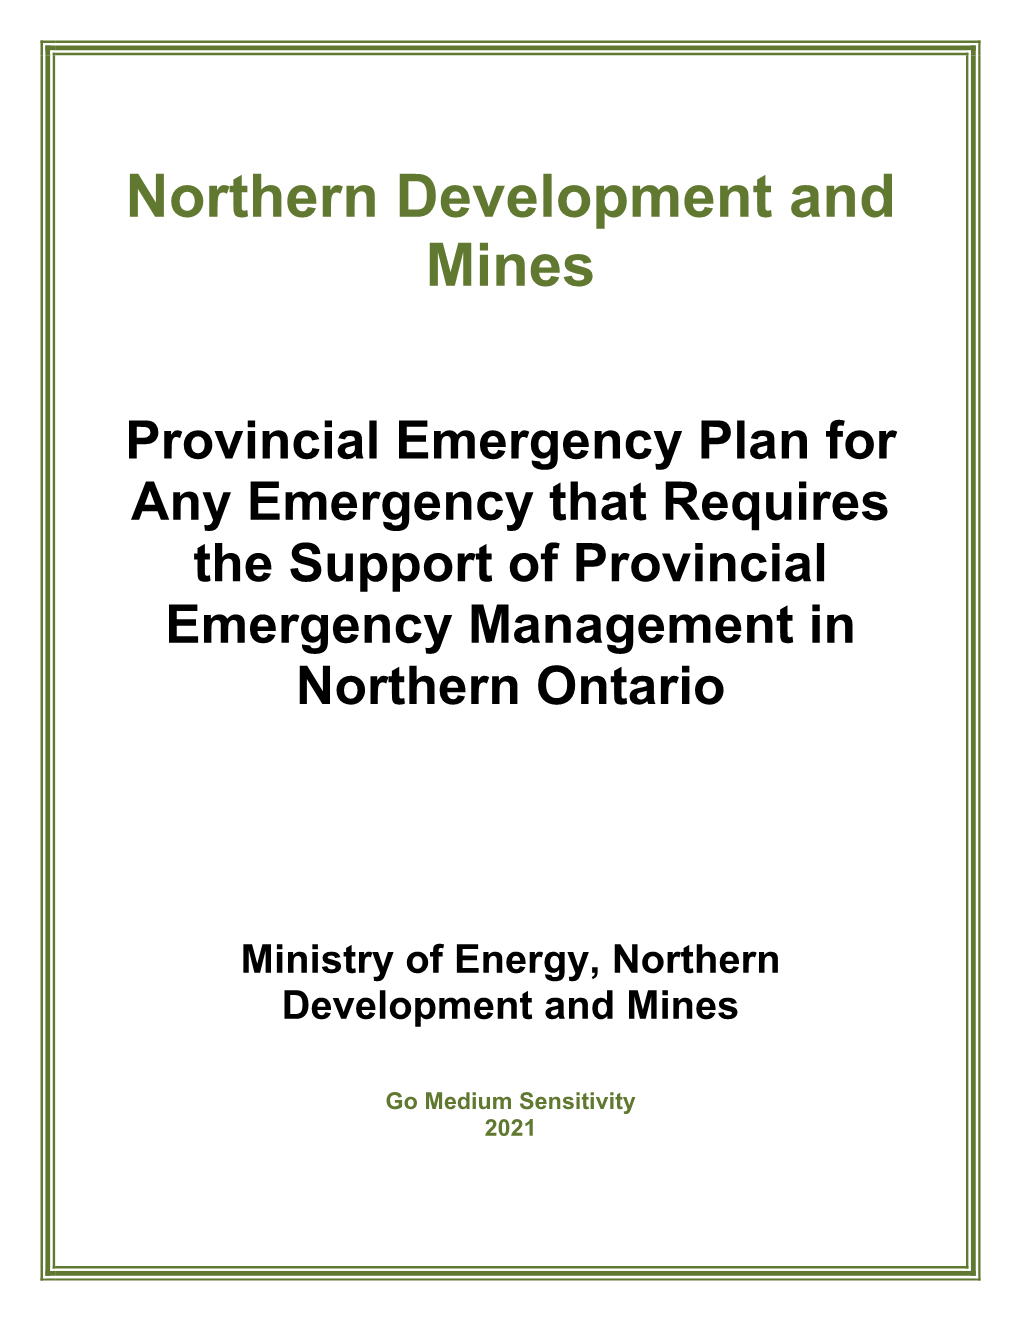 Support to Provincial Emergency Management in Northern Ontario